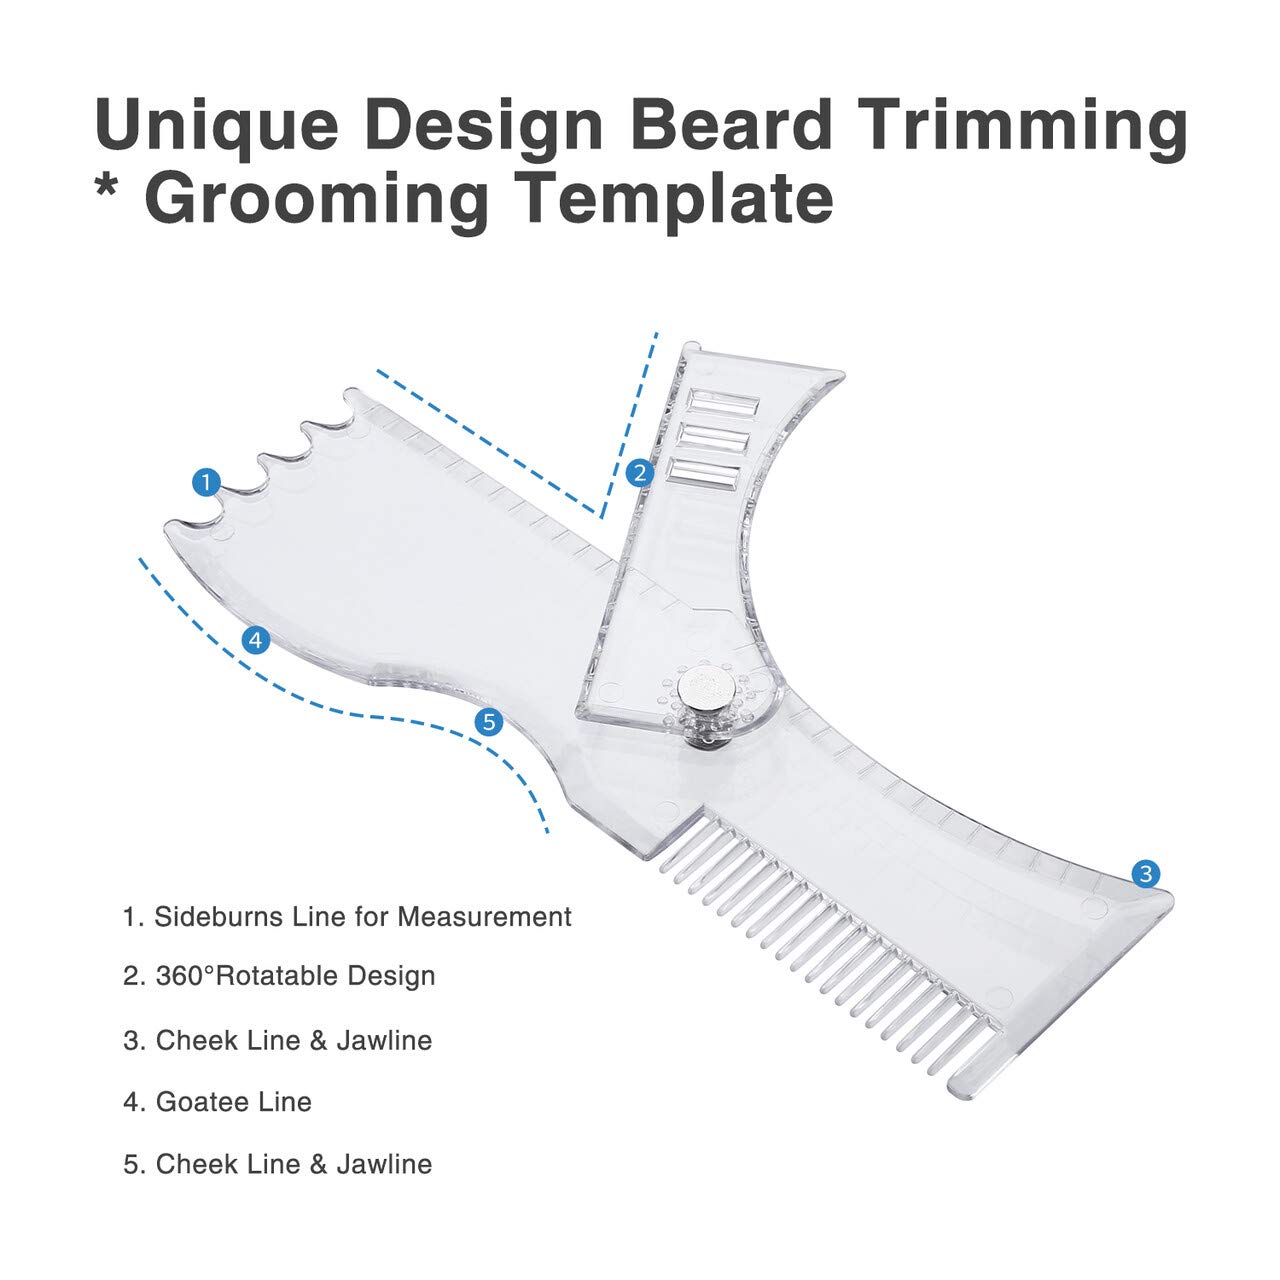 Housmile Adjustable Beard Shaping Tool Beard Styling Template for Men 360° Rotating Beard Shaper Works with Any Trimmer or Razor